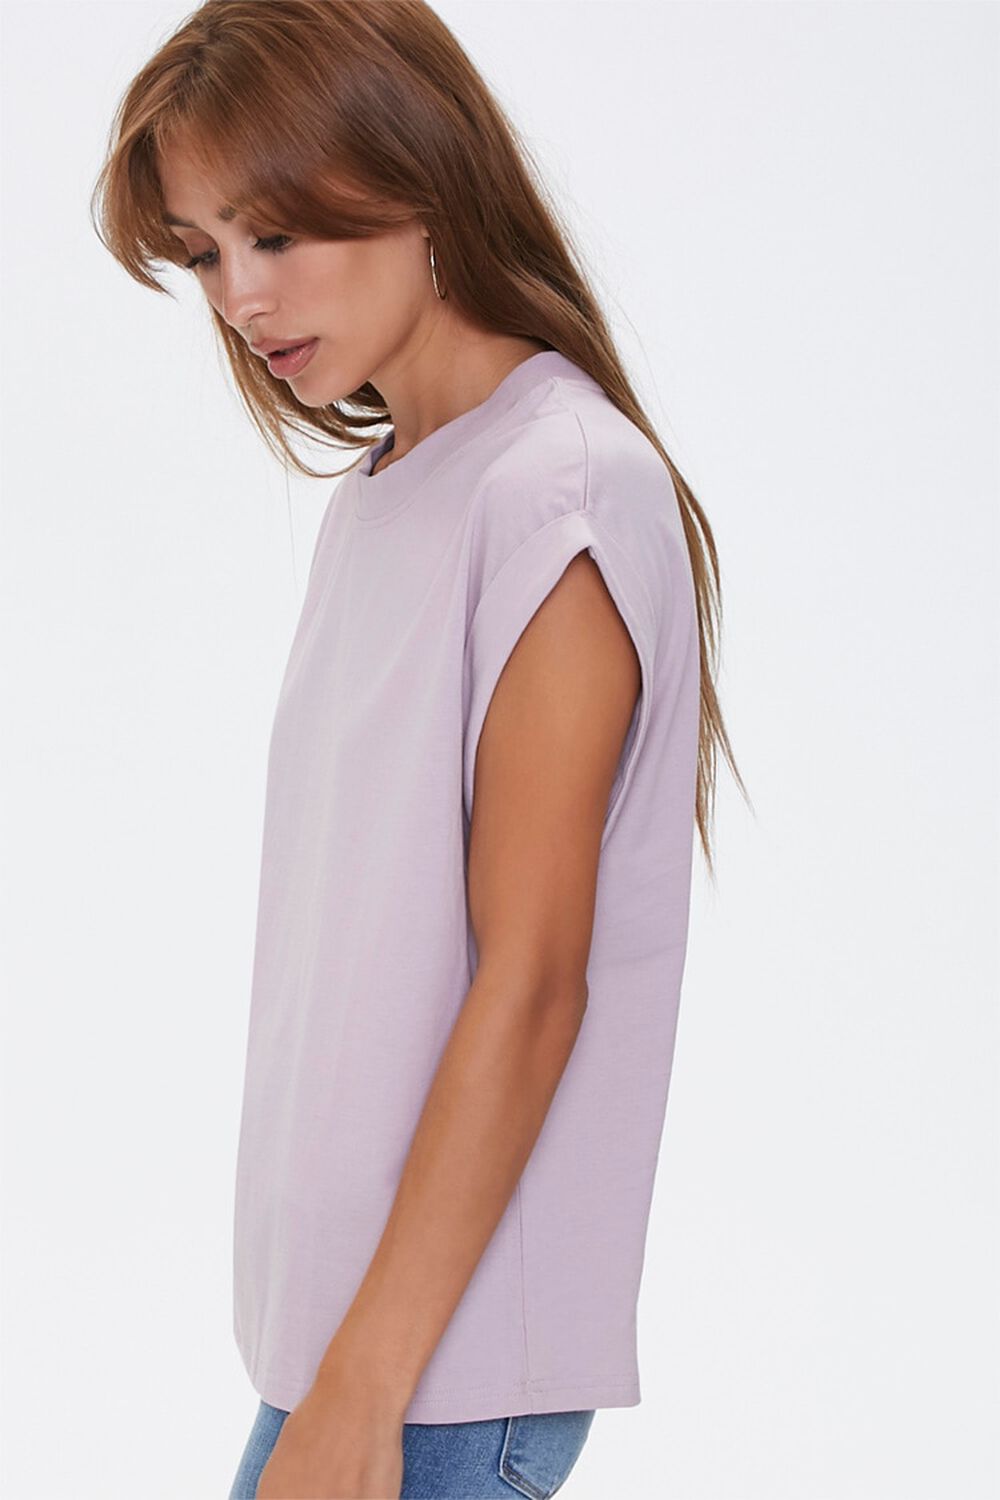 LILAC Cotton Muscle Tee, image 2